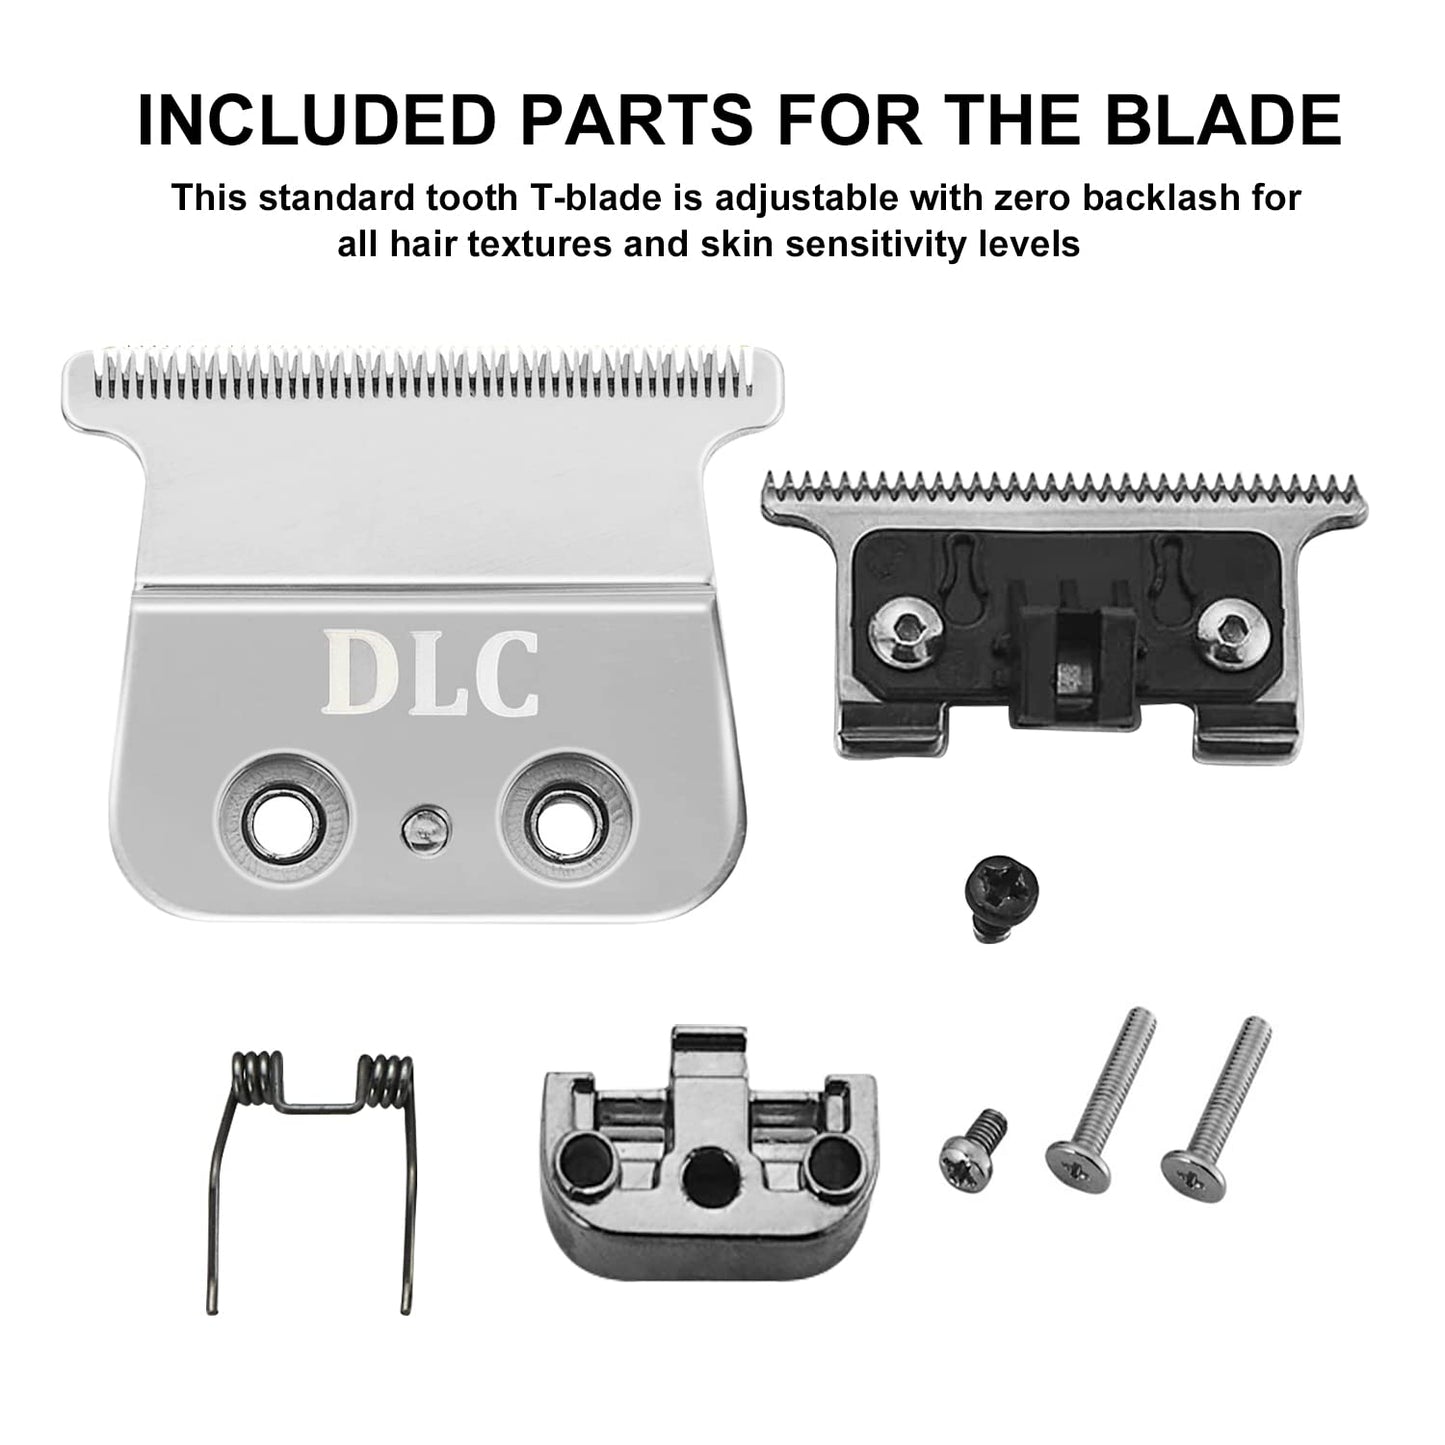 FX707Z Replacement DLC 2.0 Trimmer Blade Compatible with Babyliss FX787 & FX726 Trimmer,Compatible with Babyliss DLC 2.0 Trimmer Blade,Silver Visit the Audoc Store